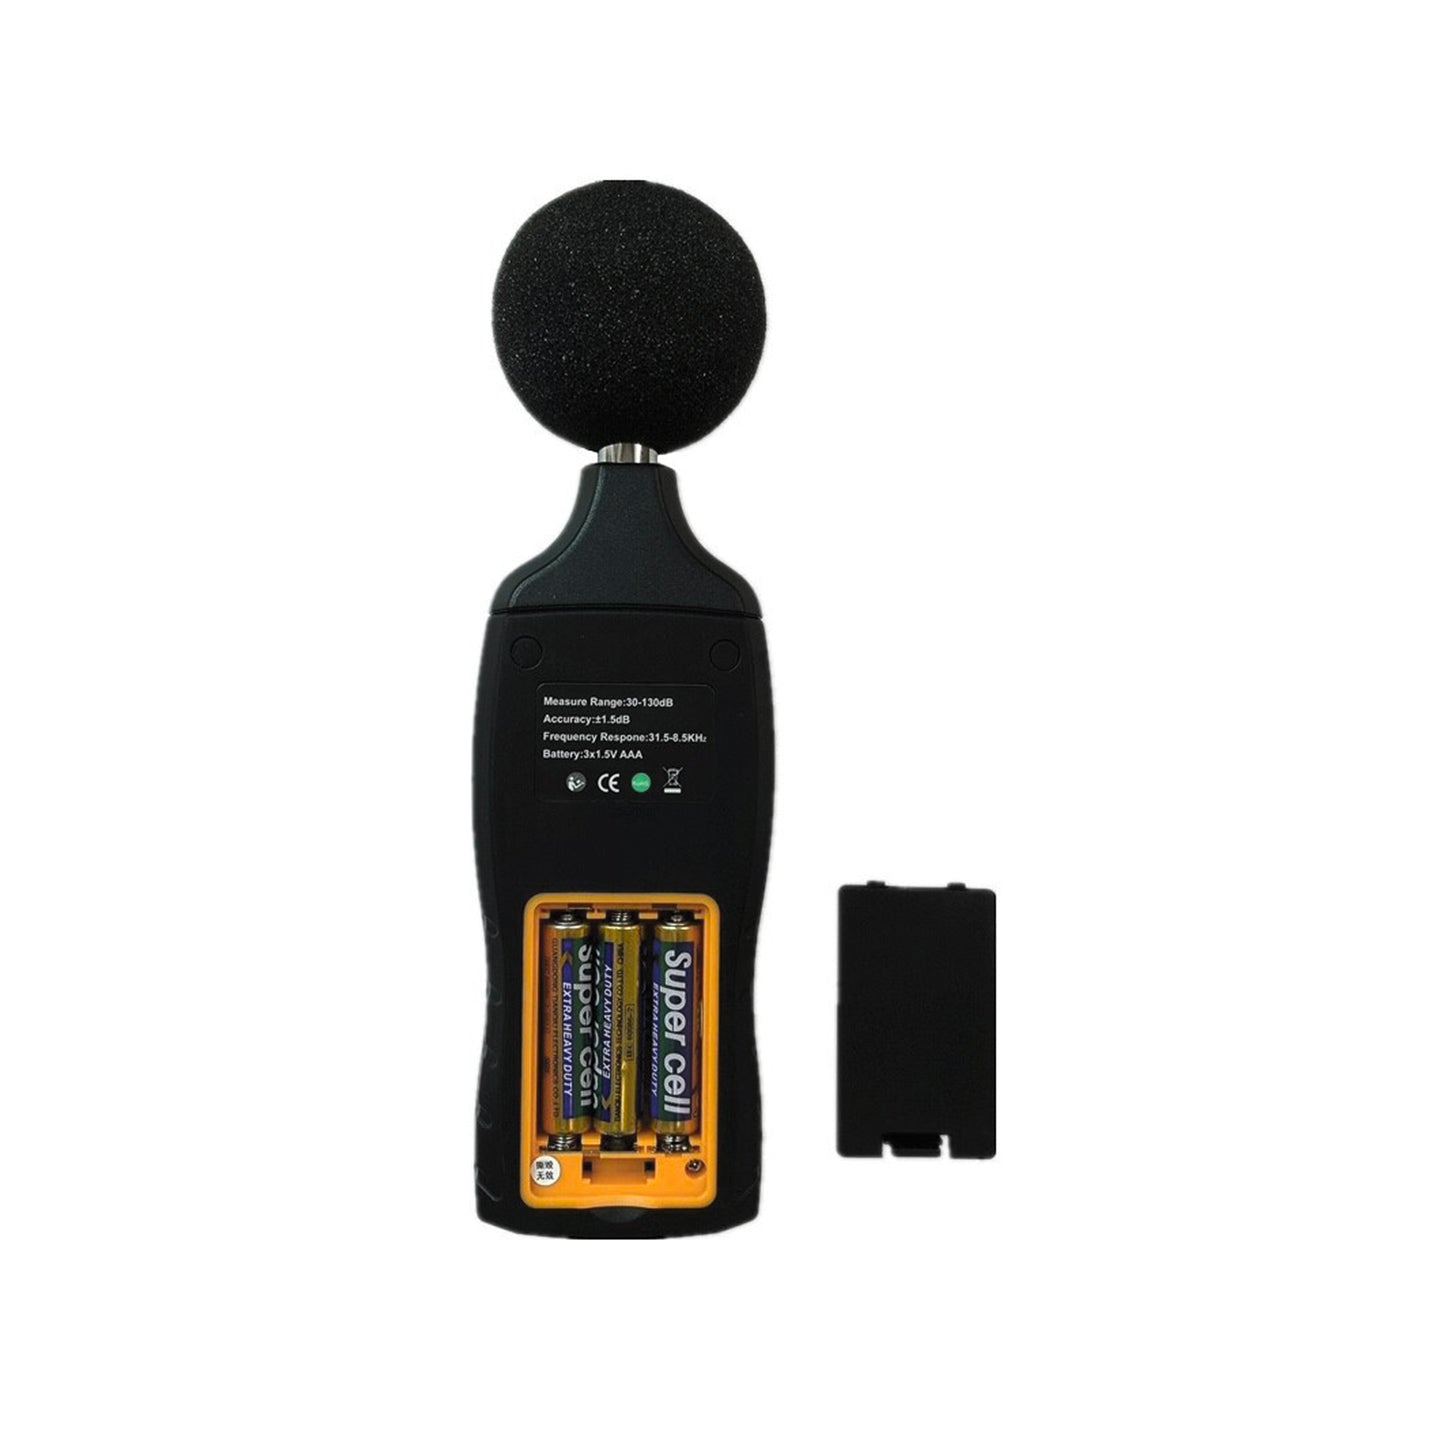 SNDWAY SW-523 Digital Sound Level Meter Measuring Instrument with LCD Display and Data Storage function for Monitoring or Controlling Noise Volume